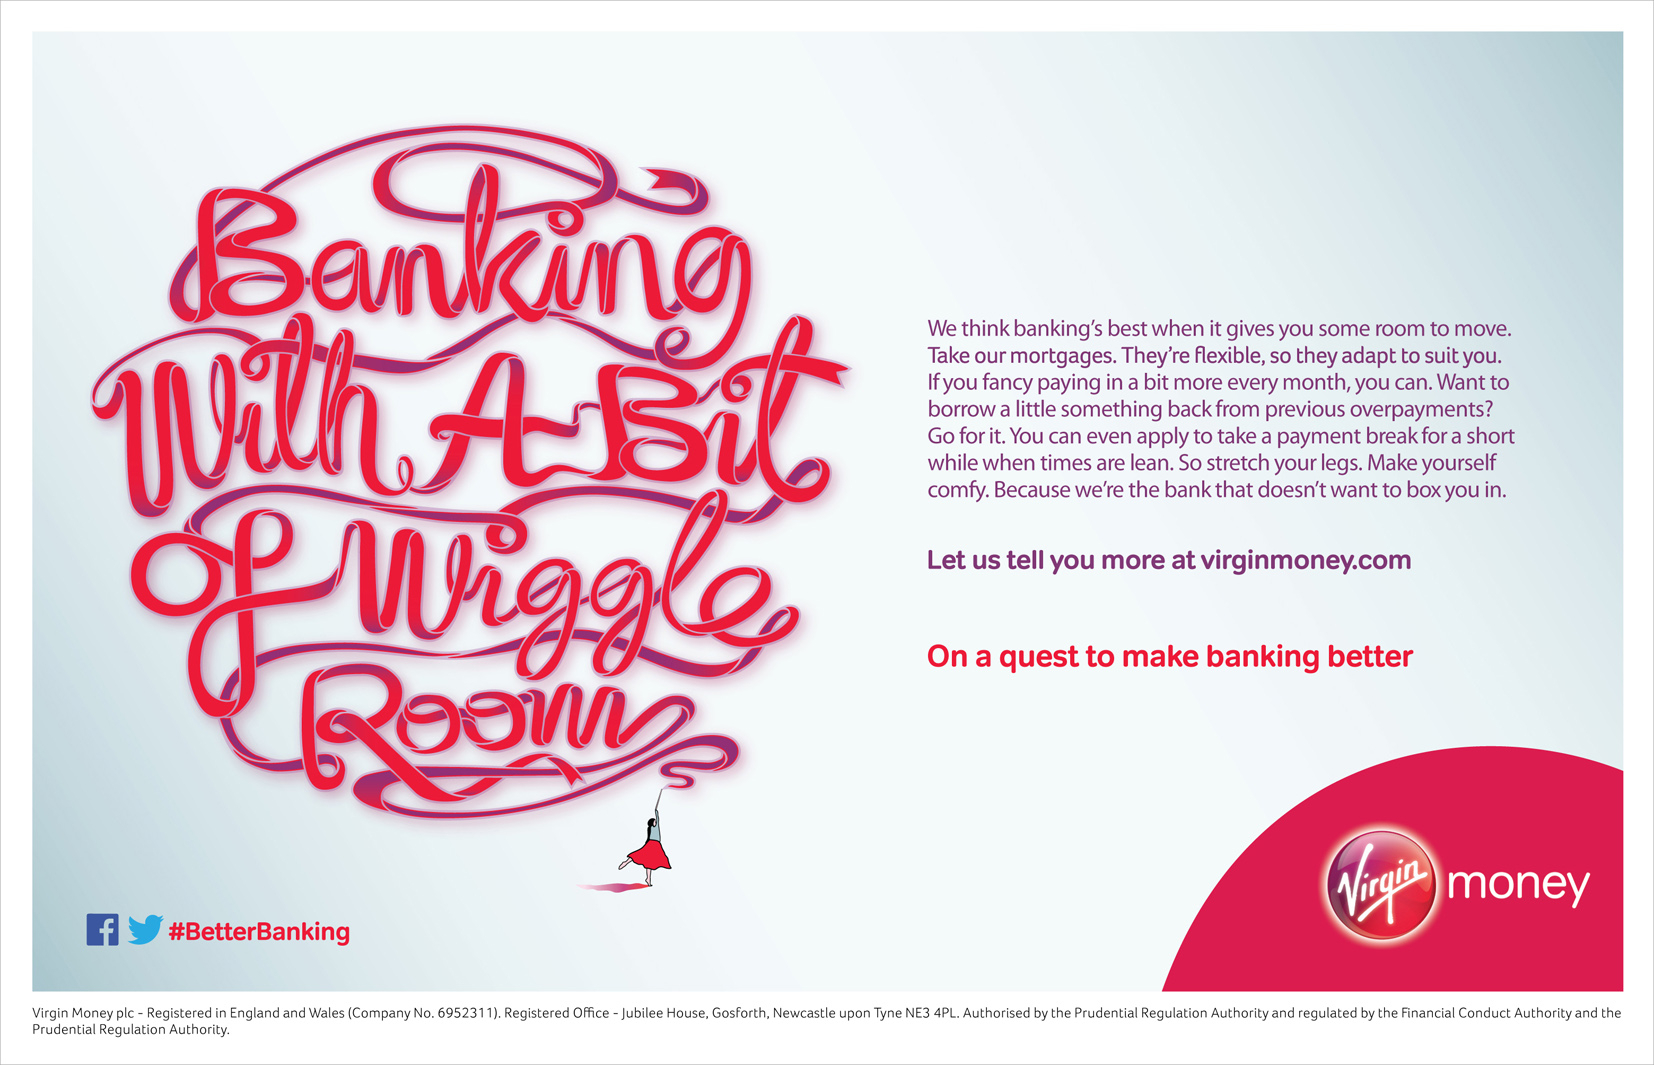 Banking With A Bit Of Wiggle Room / Virgin Money